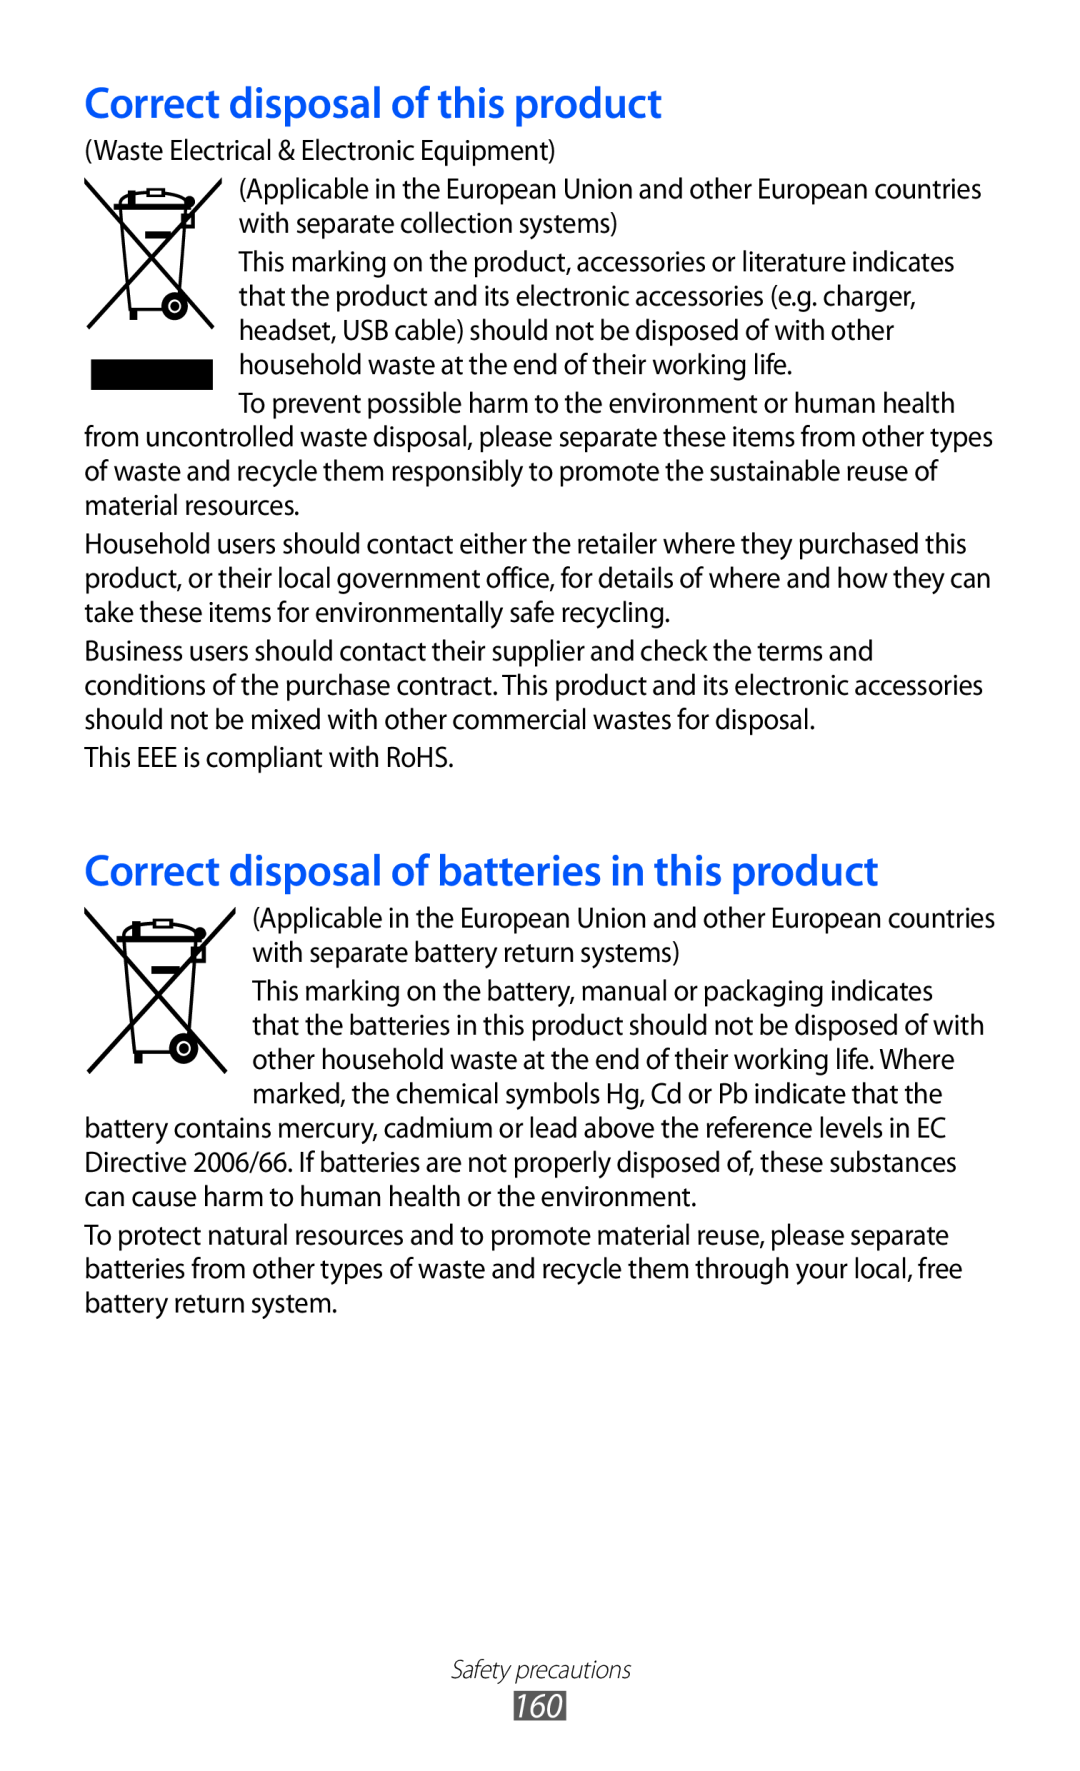 Samsung GT-I9070 user manual Correct disposal of this product, Correct disposal of batteries in this product 